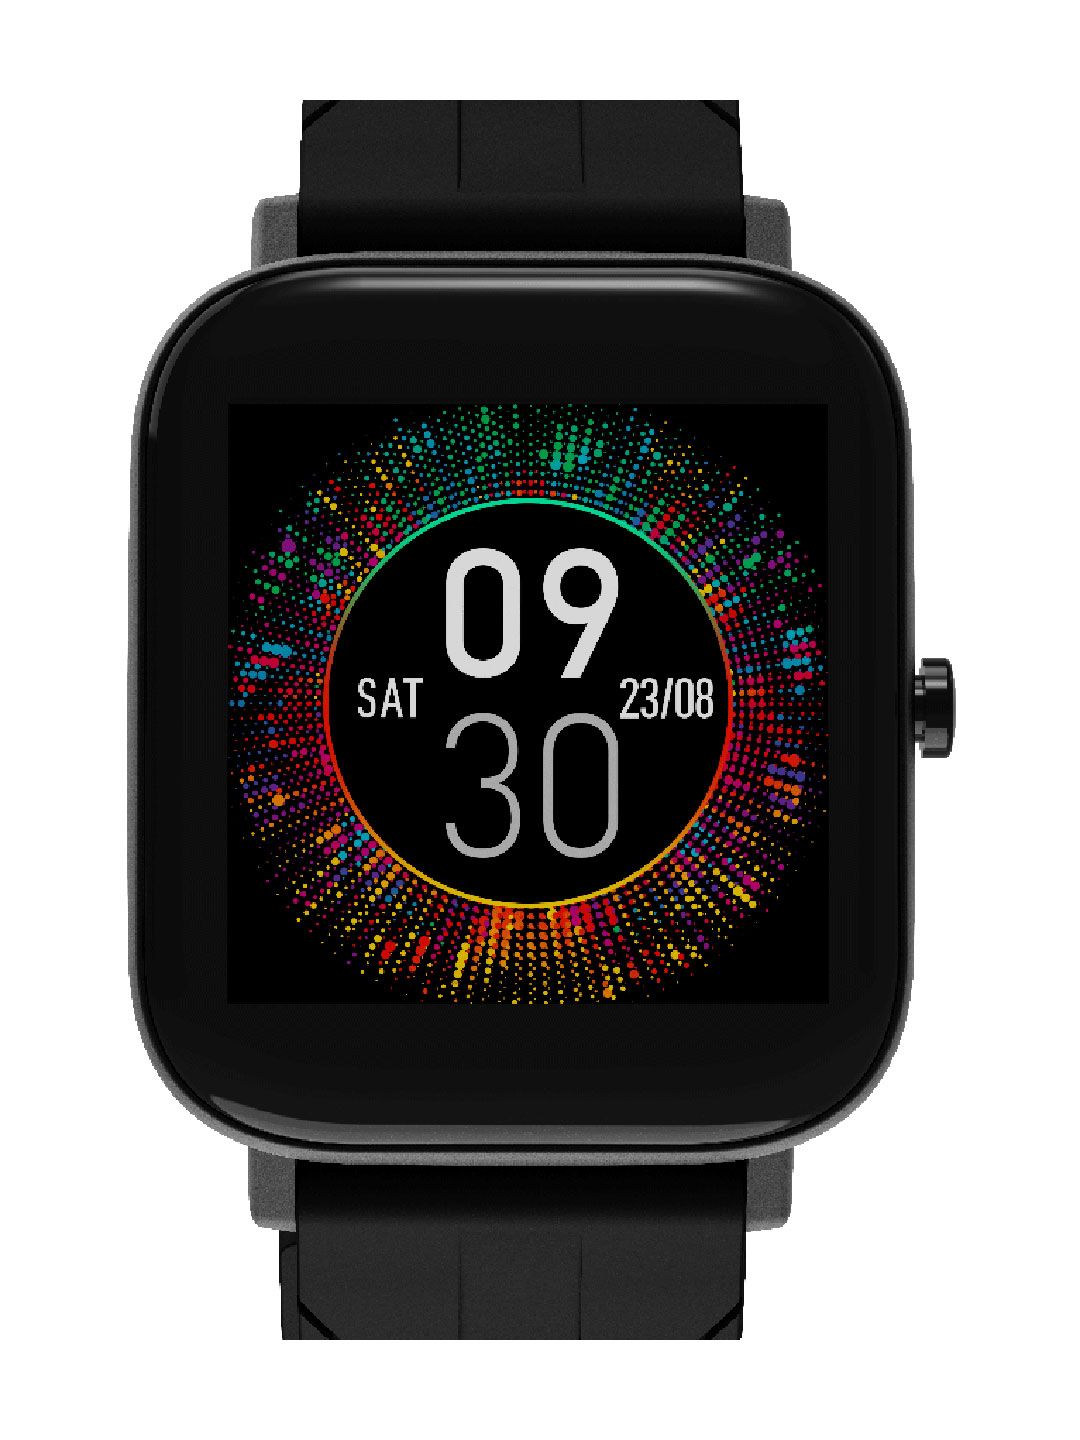 WINGS Strive 100 with Real SPO2 Large Display Smartwatch - Black Price in India